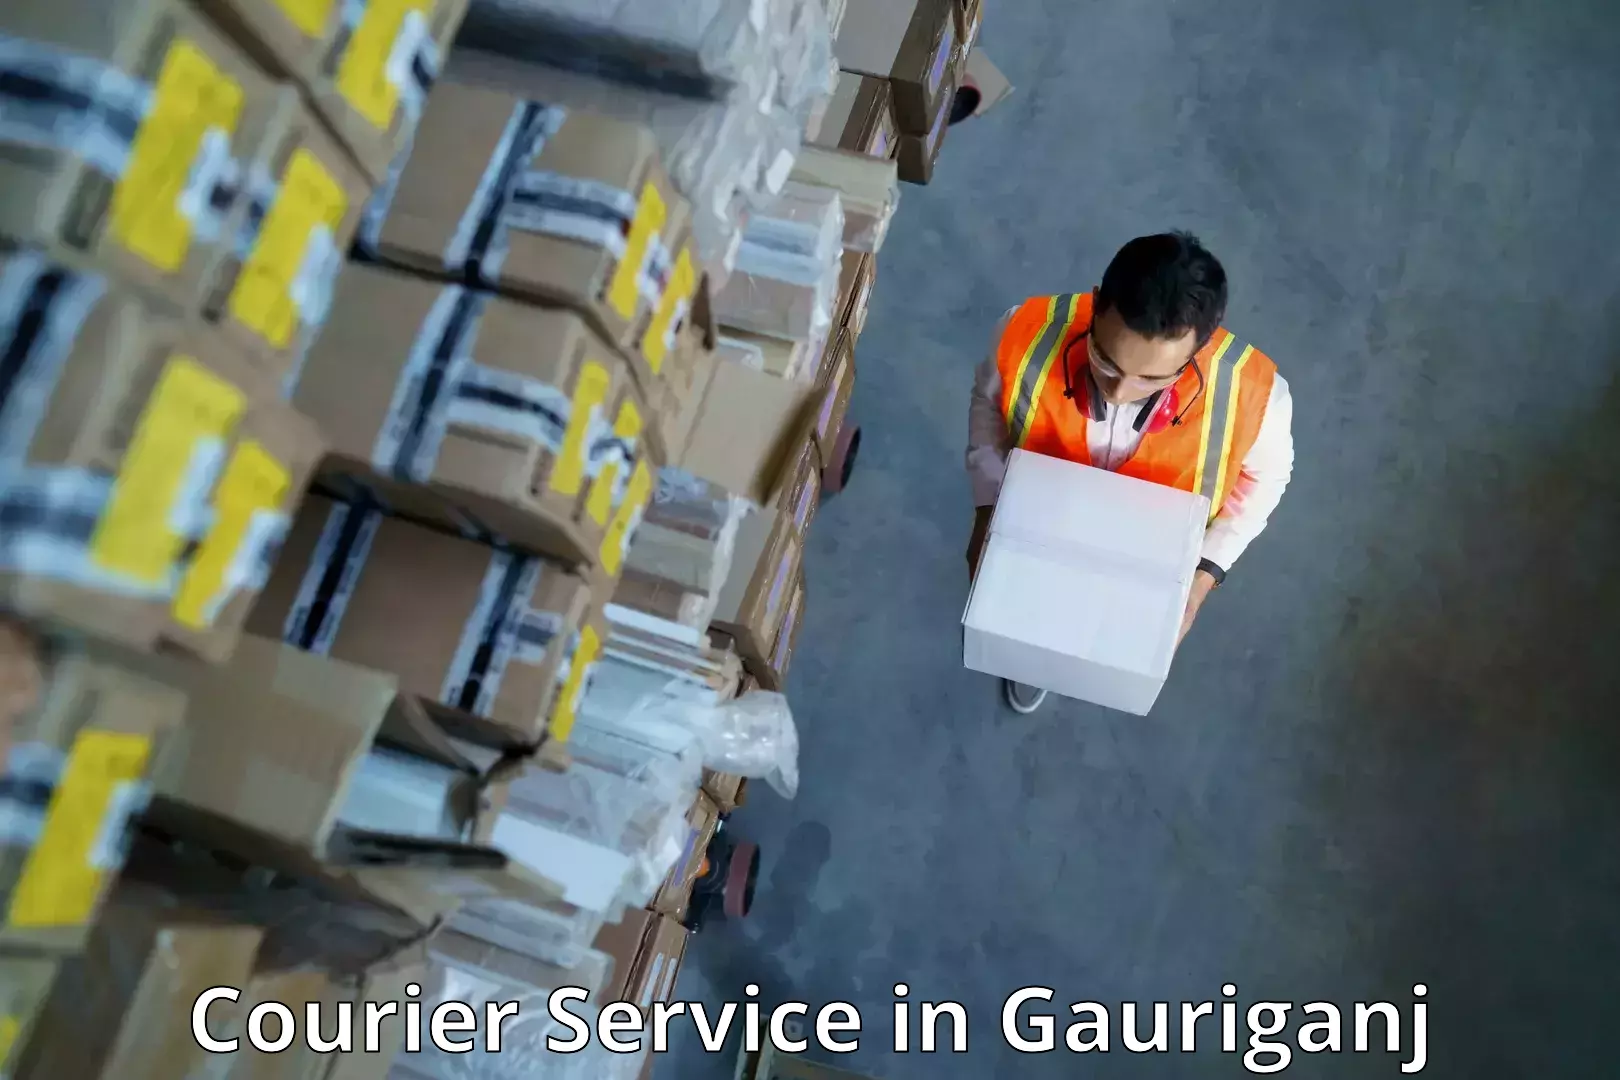 Courier service booking in Gauriganj